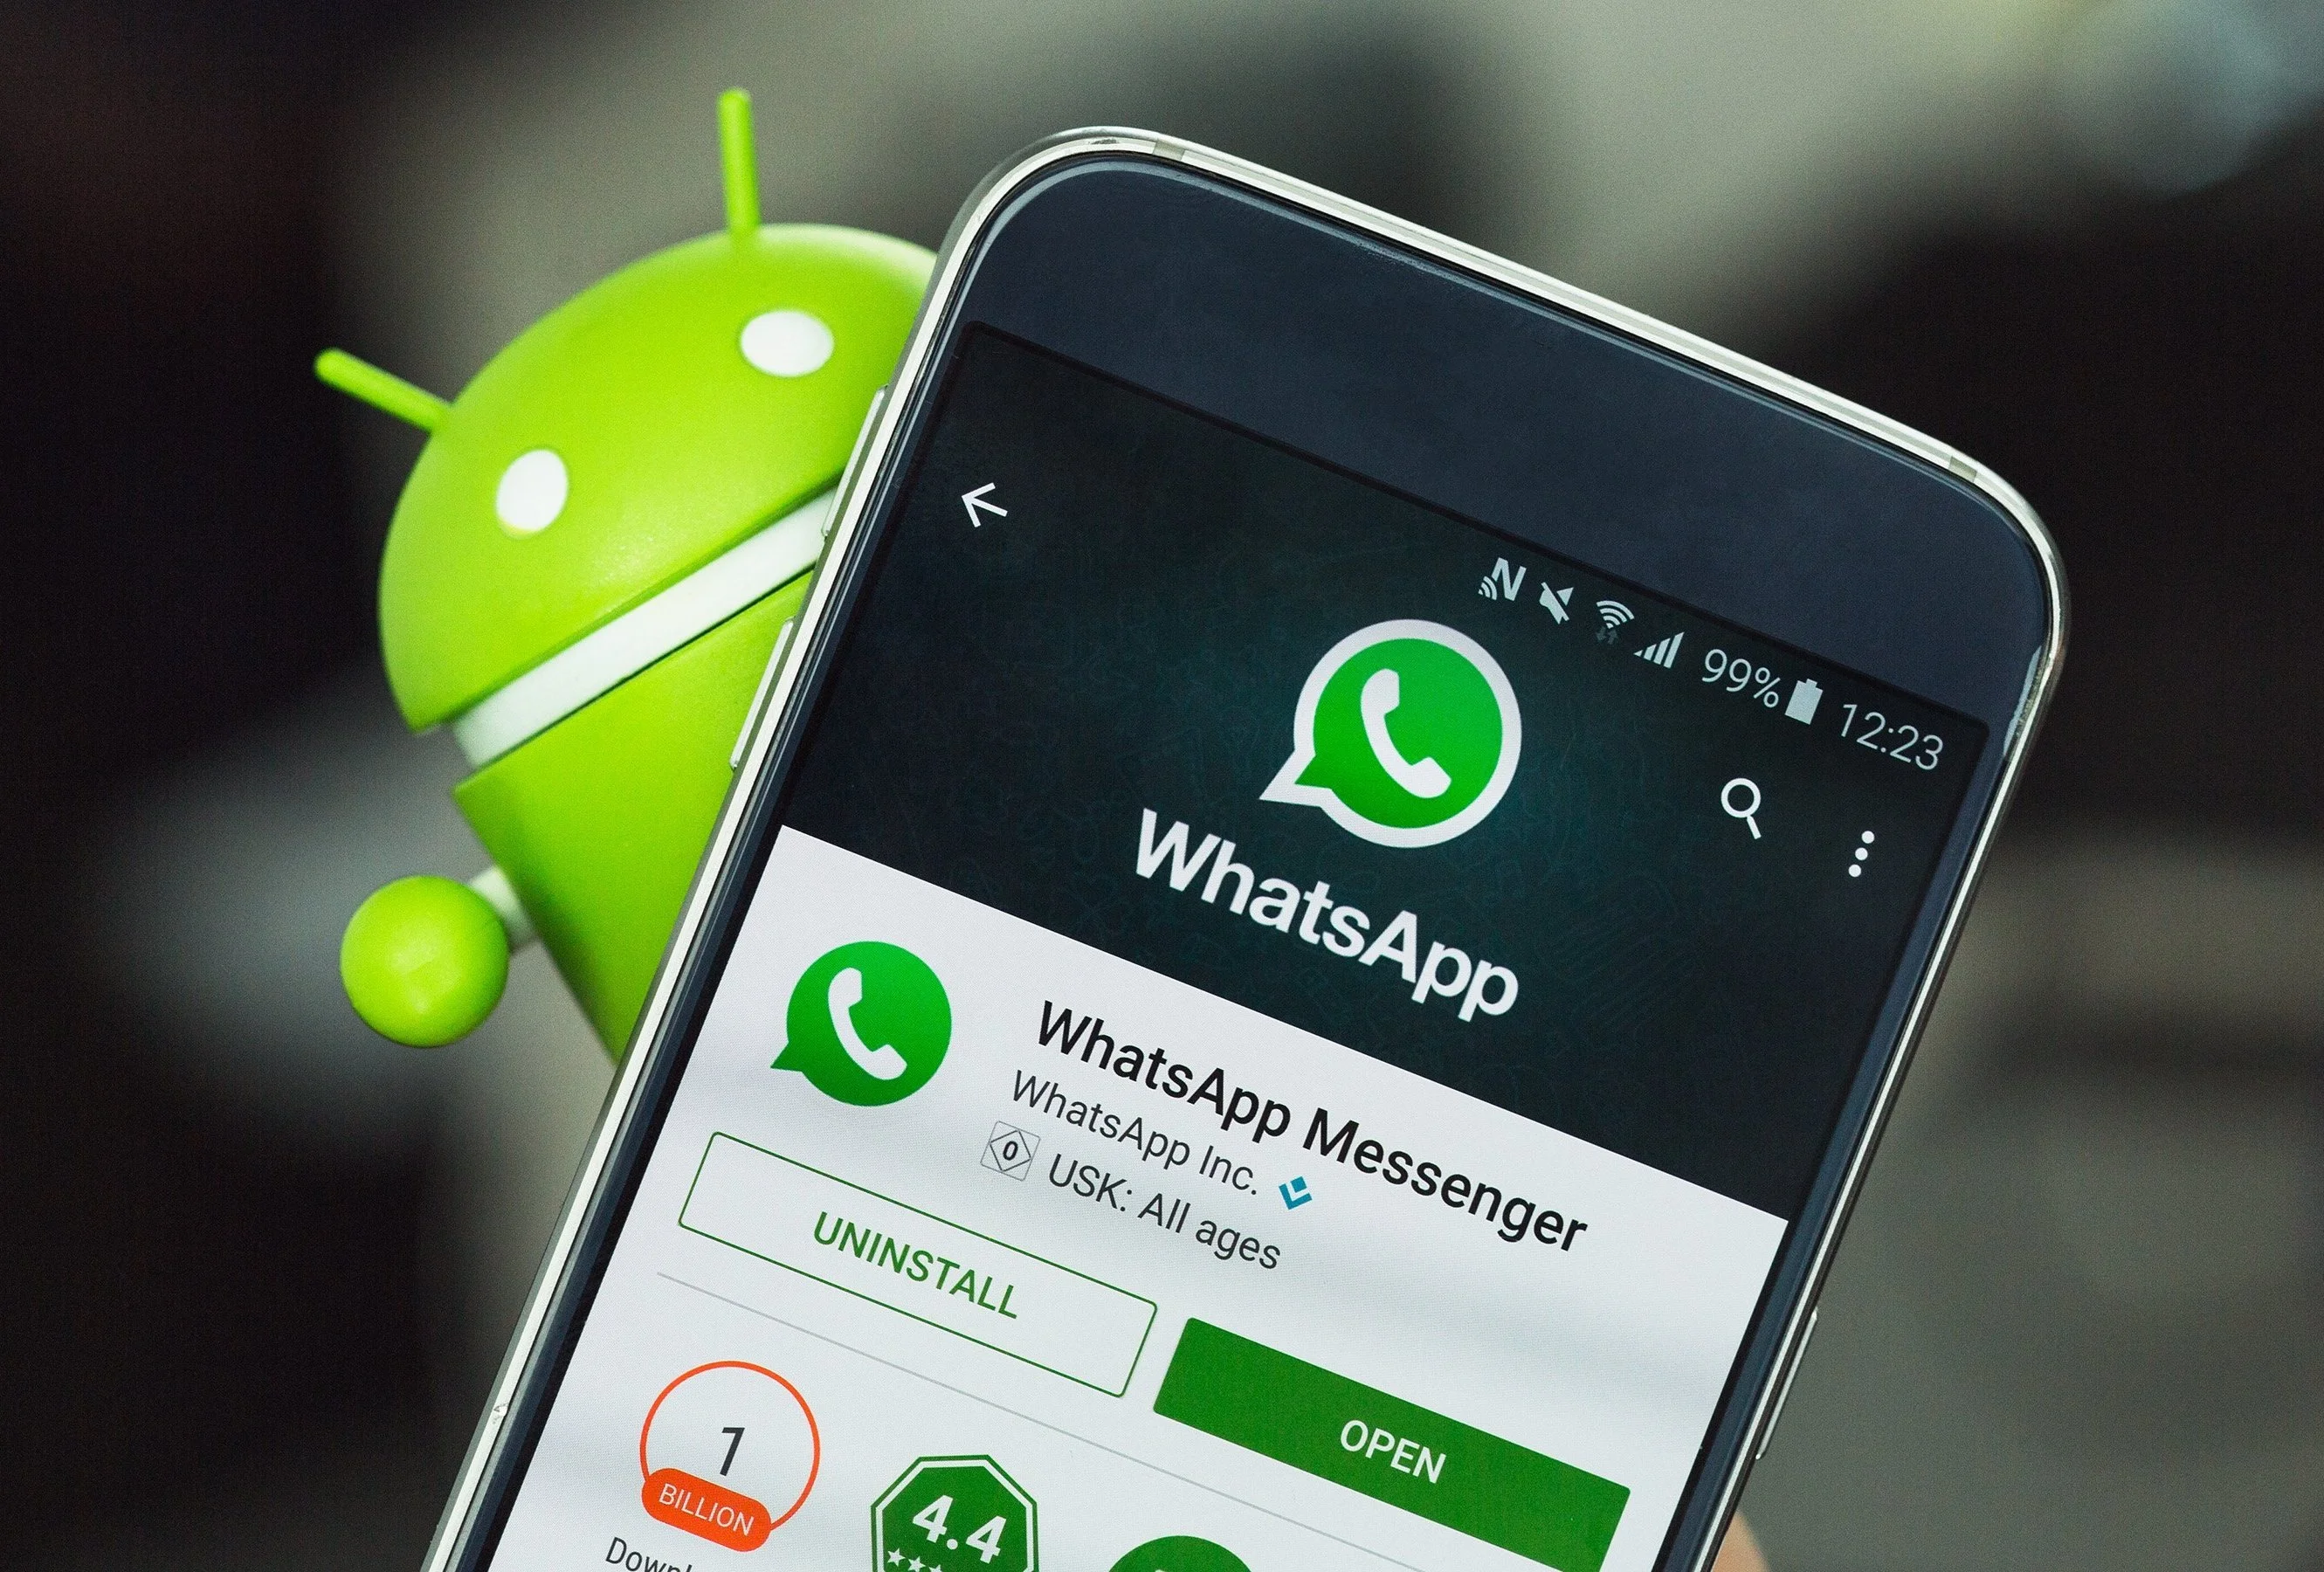 Whatsapp is getting a new feature. The interface of the application will also change.